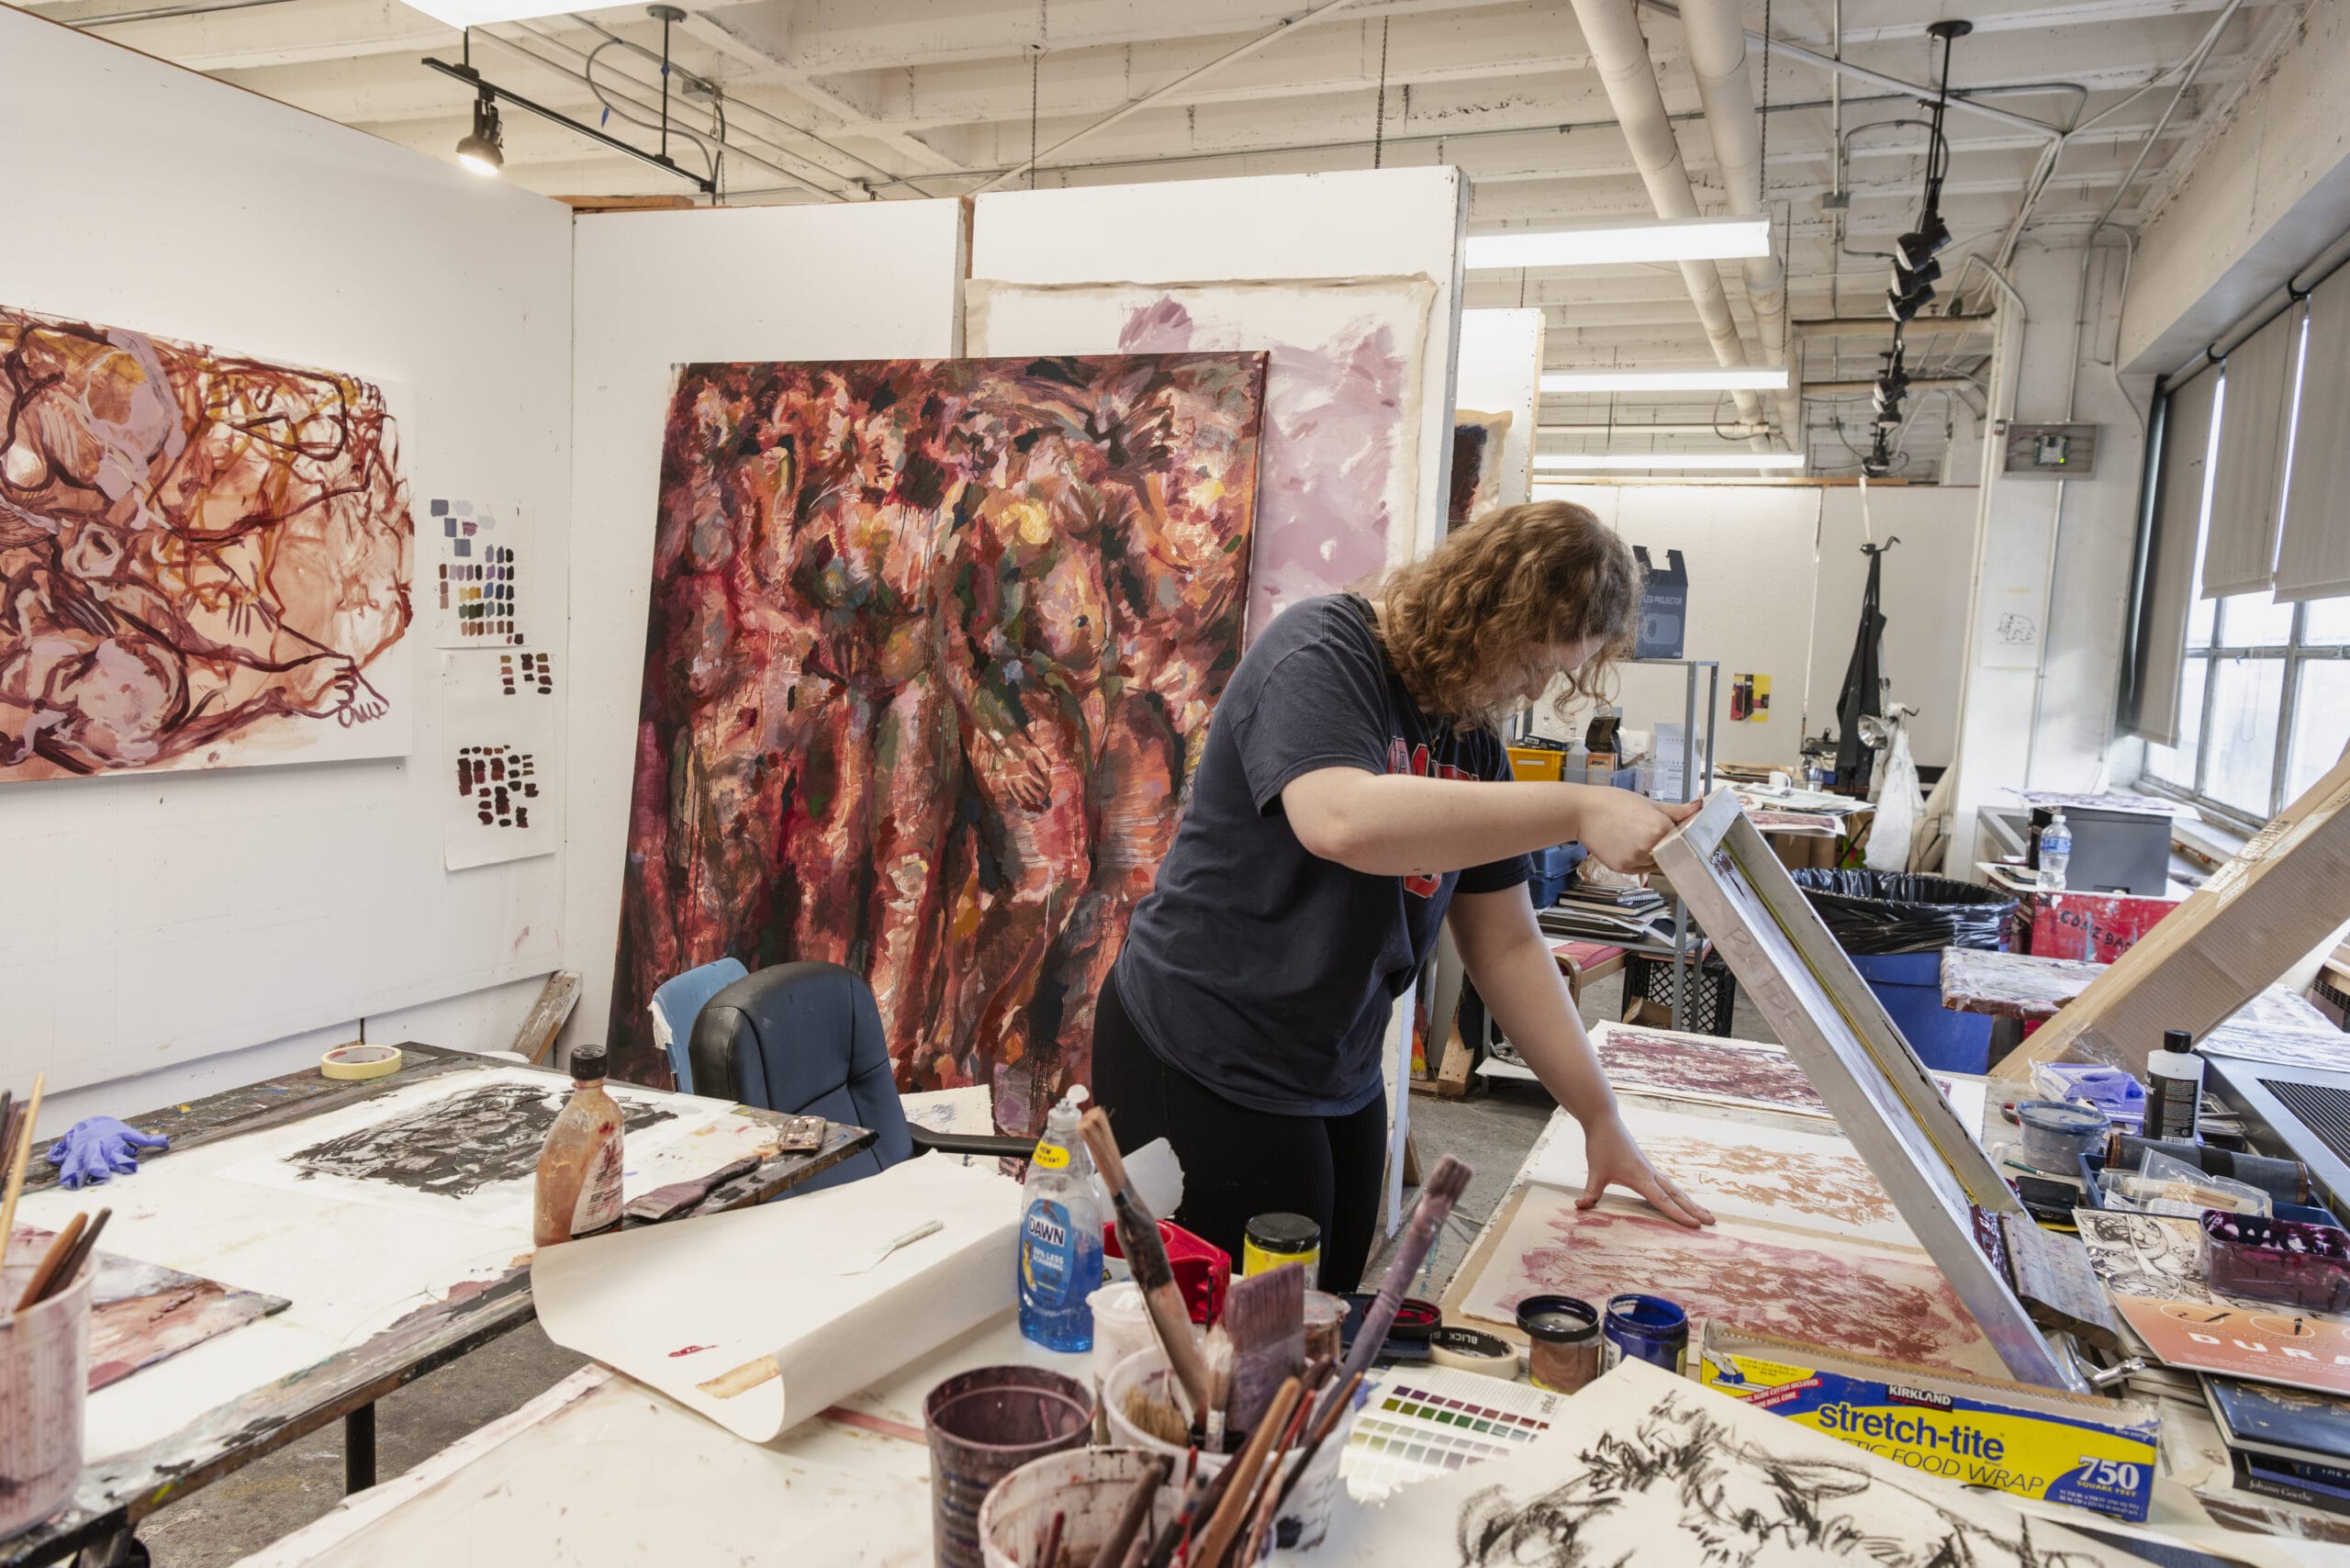 A student lifts a printmaking screen while working in her studio